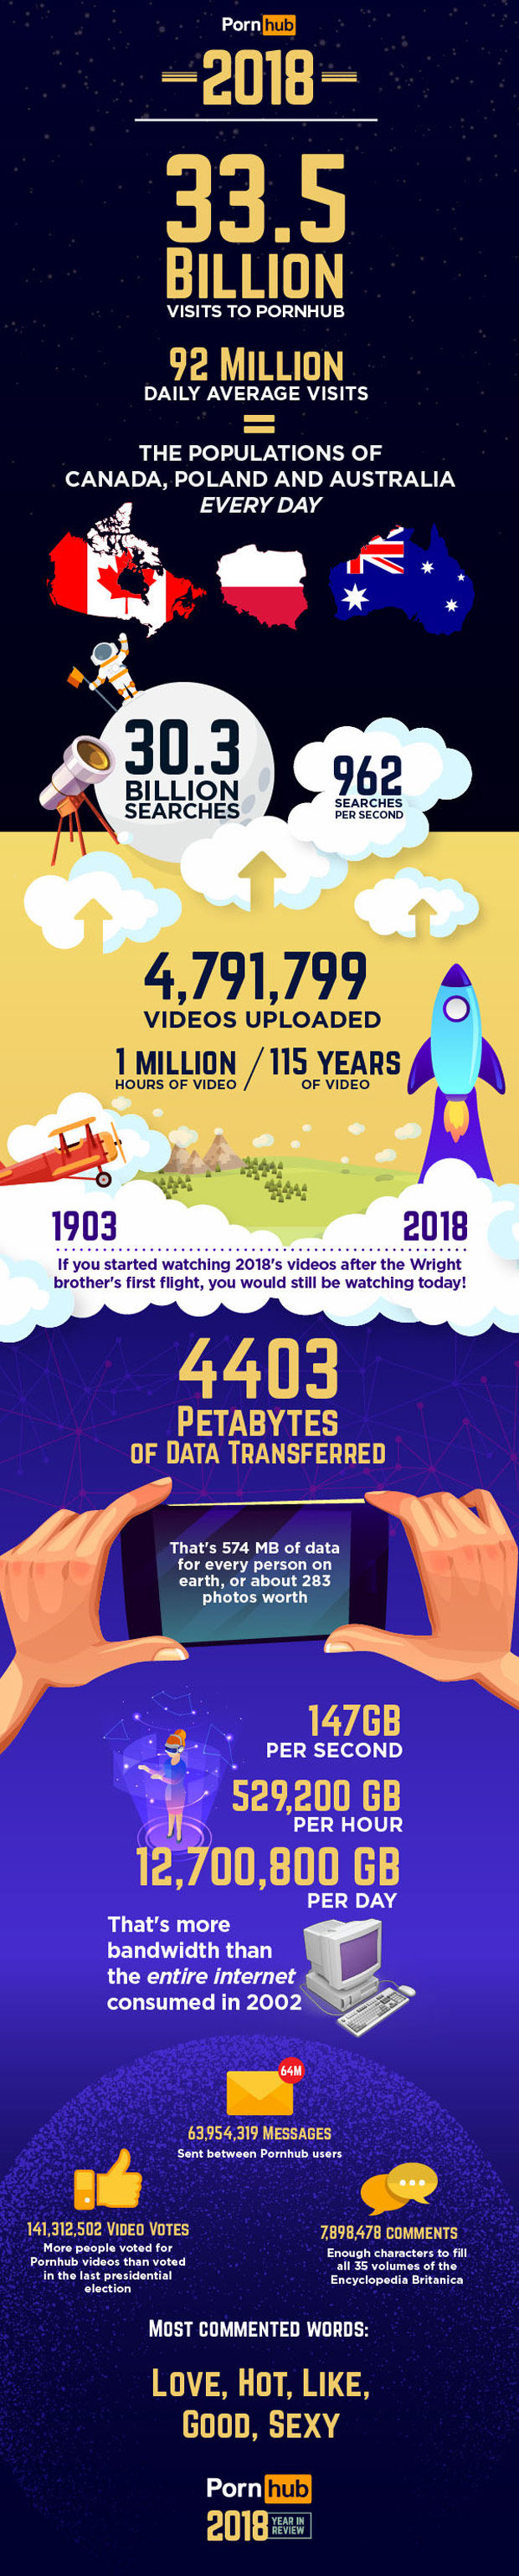 pornhub-insights-year-review-2018-big-numbers-infographic